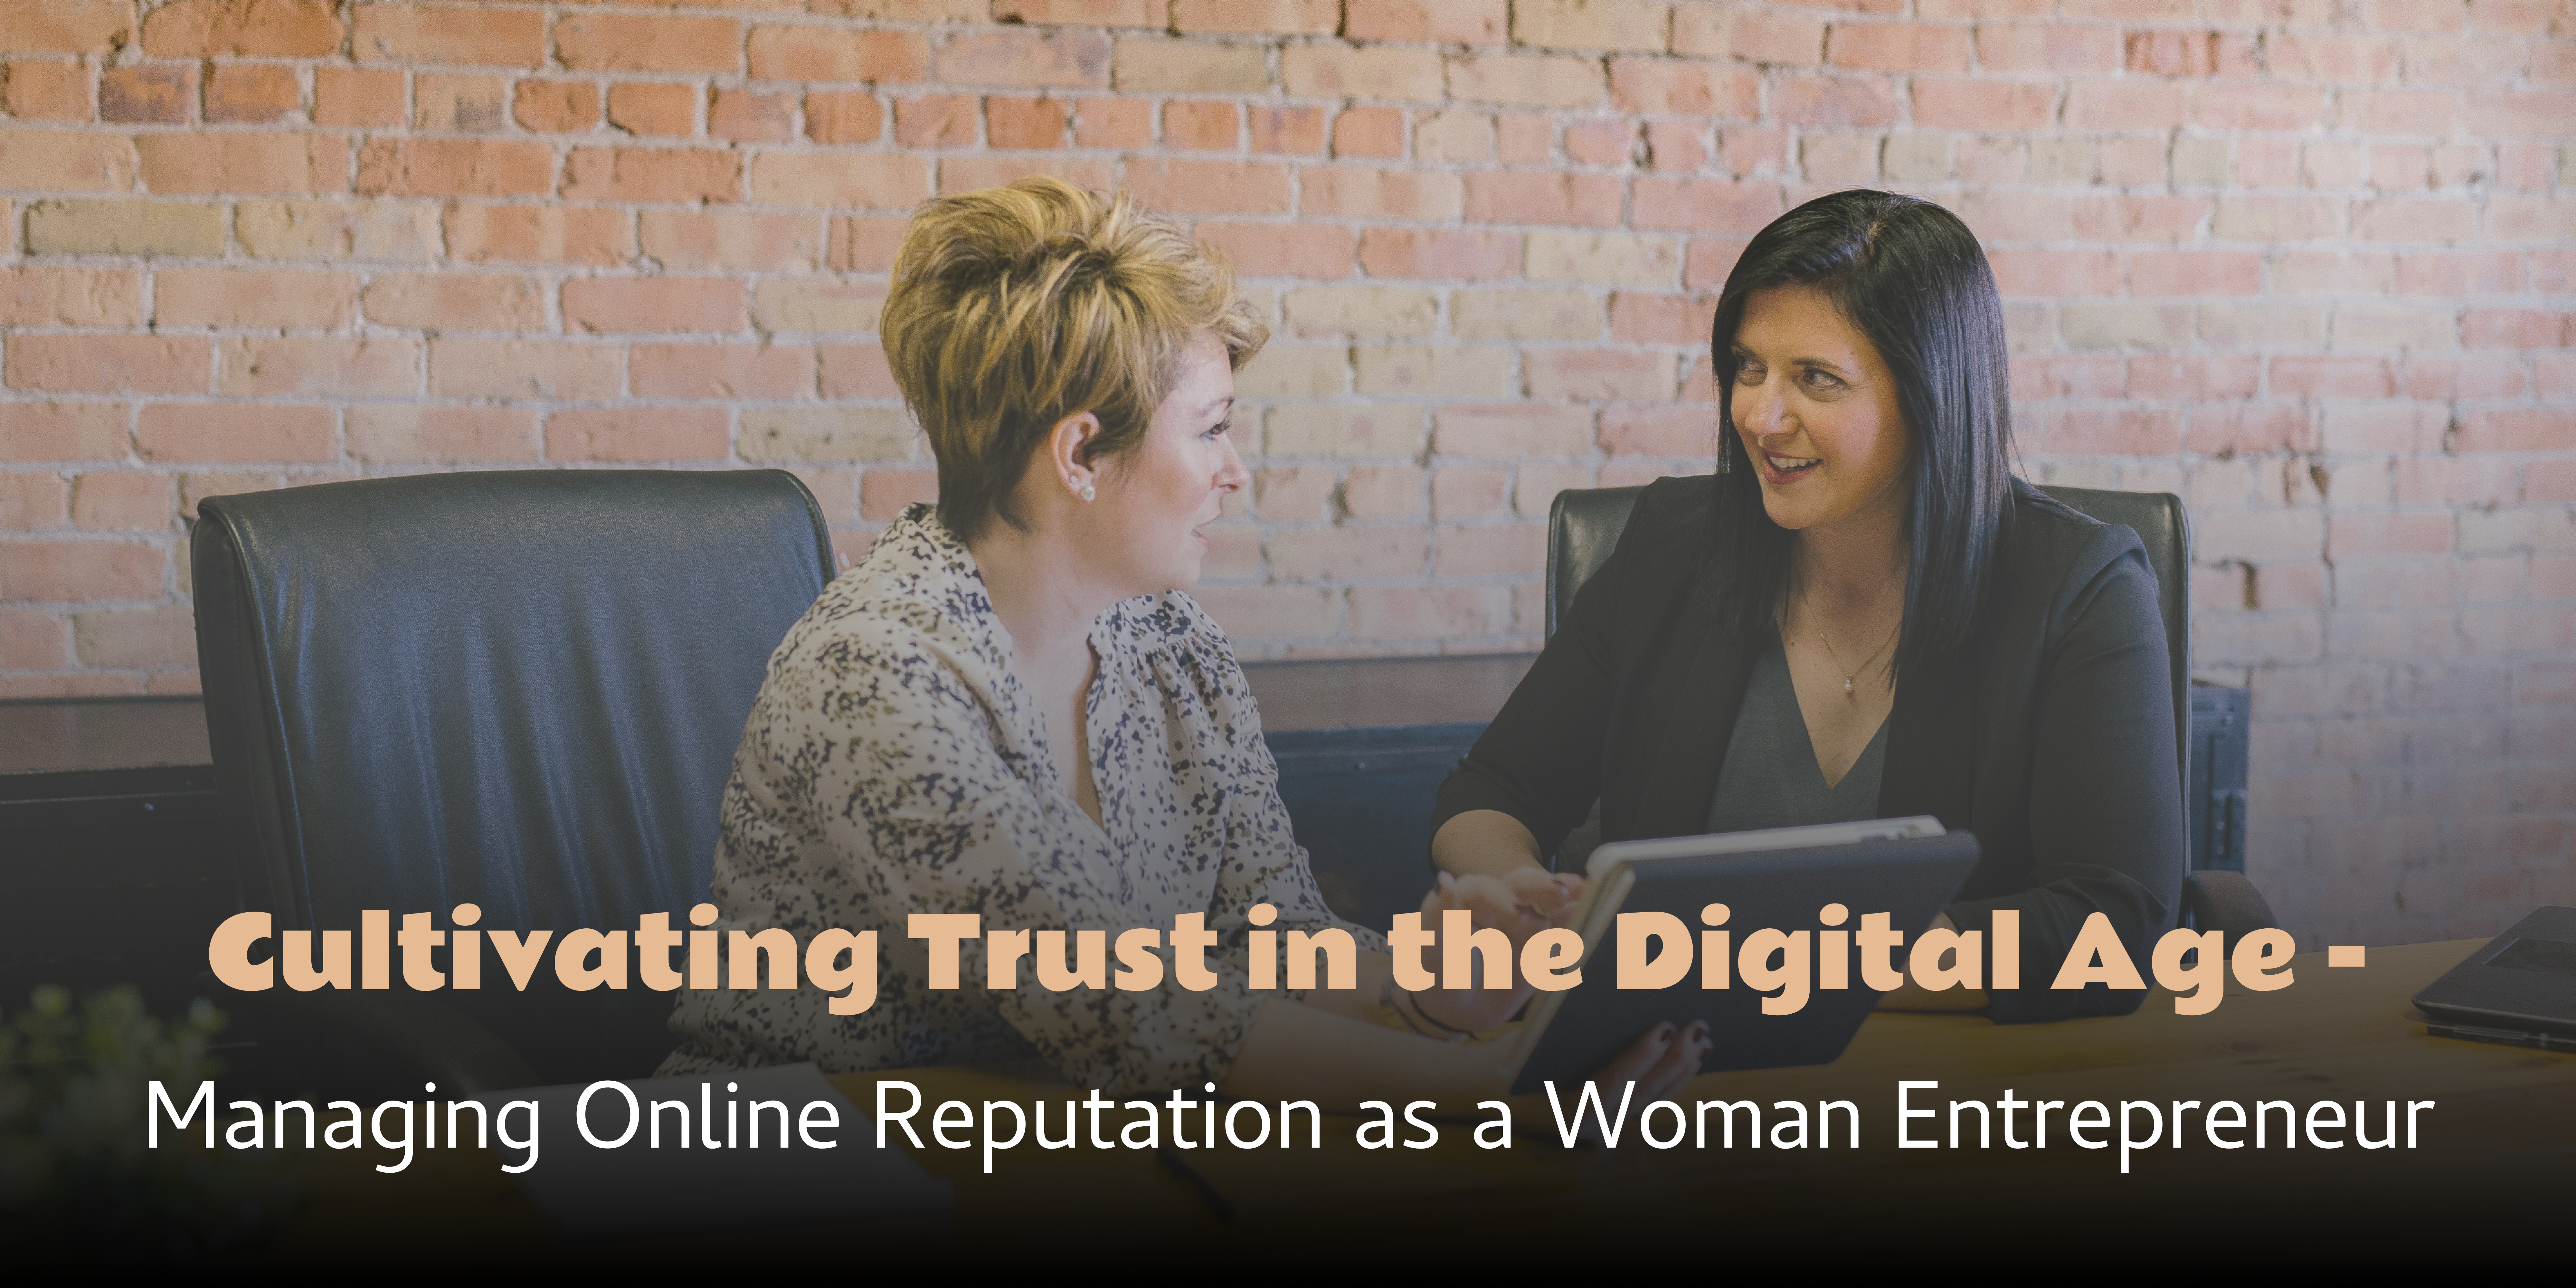 Cultivating Trust in the Digital Age: Managing Online Reputation as a Woman Entrepreneur